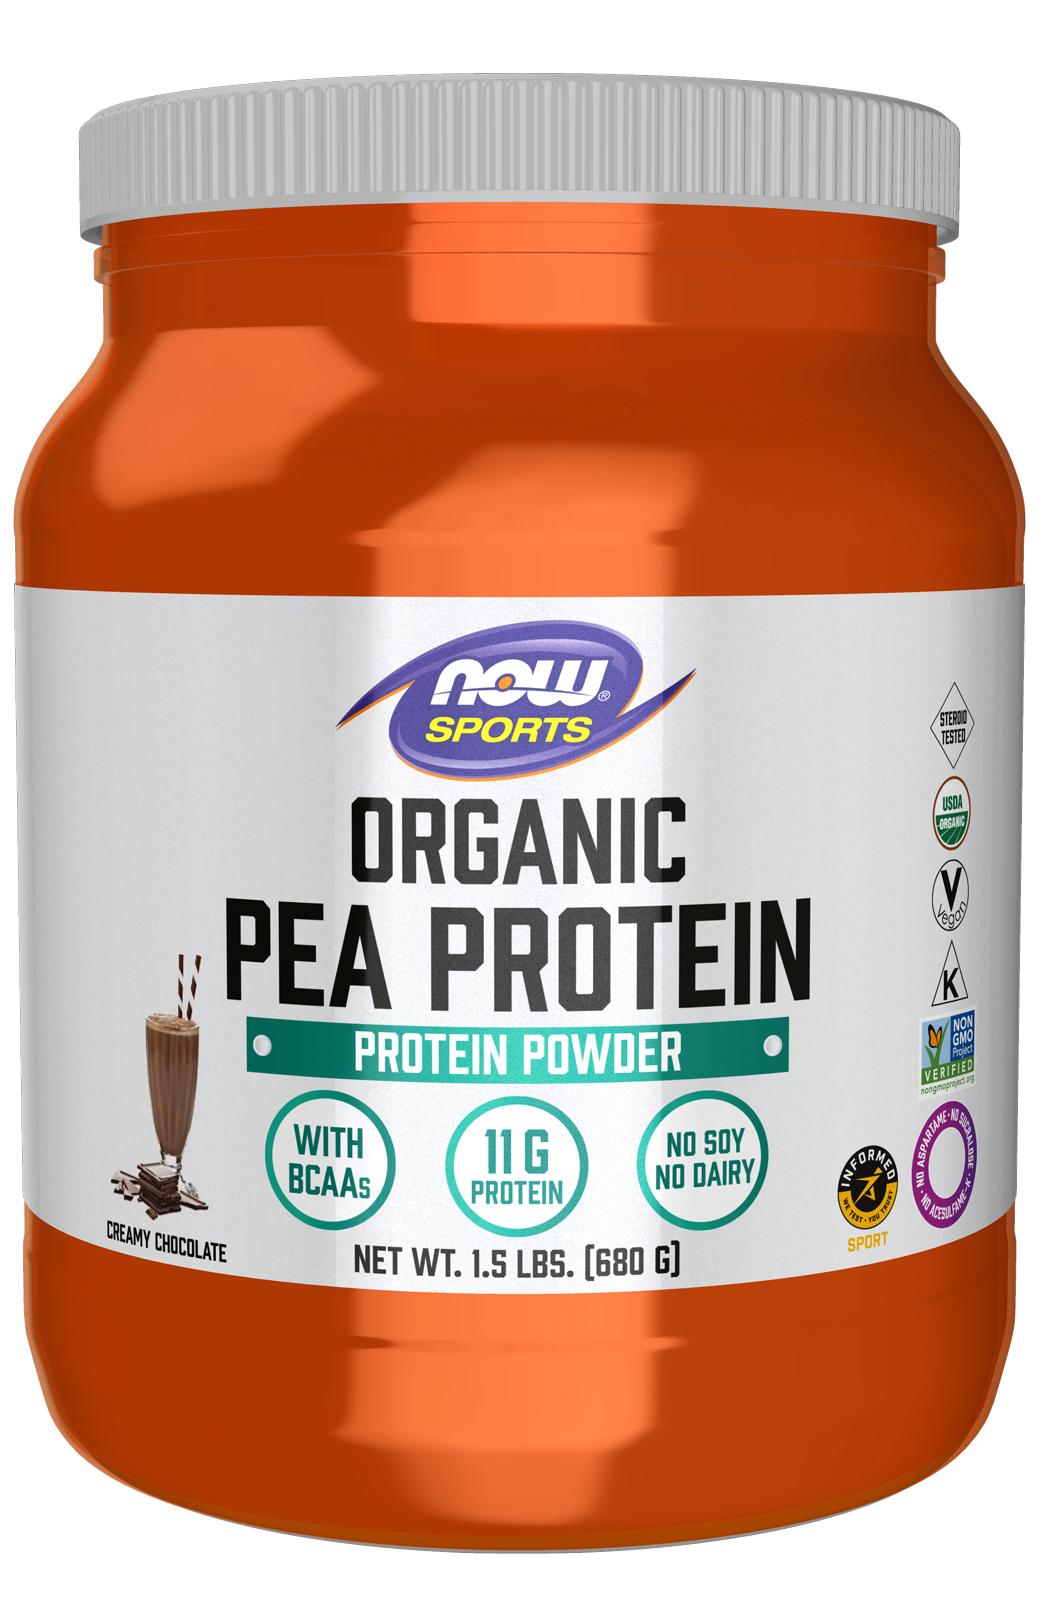 Pea Protein, Organic Creamy Chocolate Powder - 1.5 lbs. Bottle Front